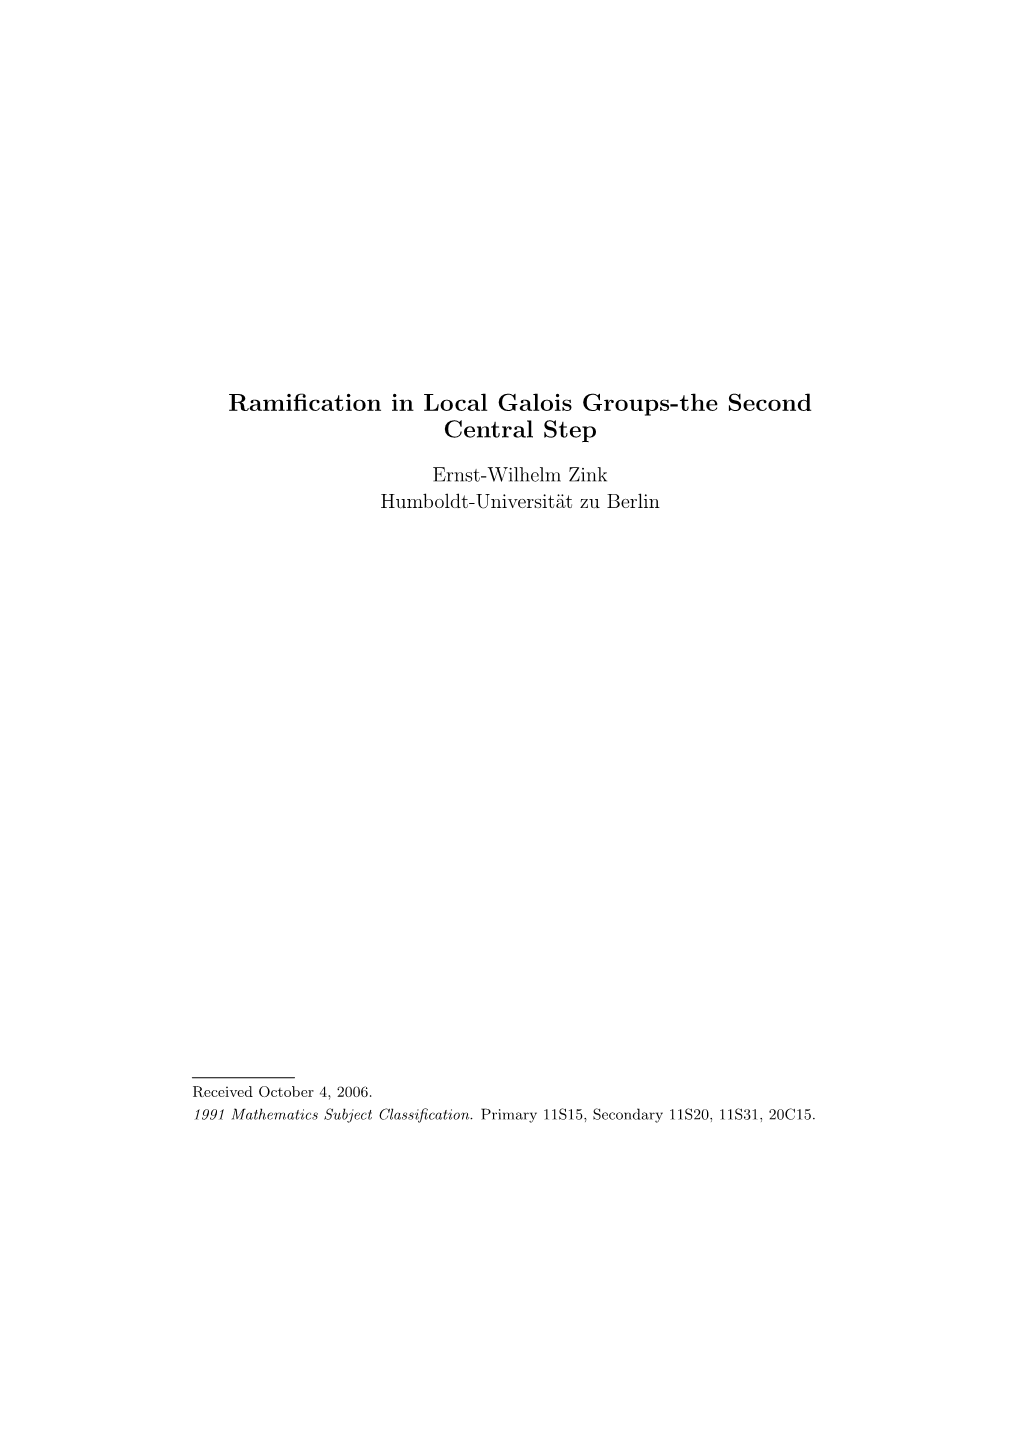 Ramification in Local Galois Groups-The Second Central Step